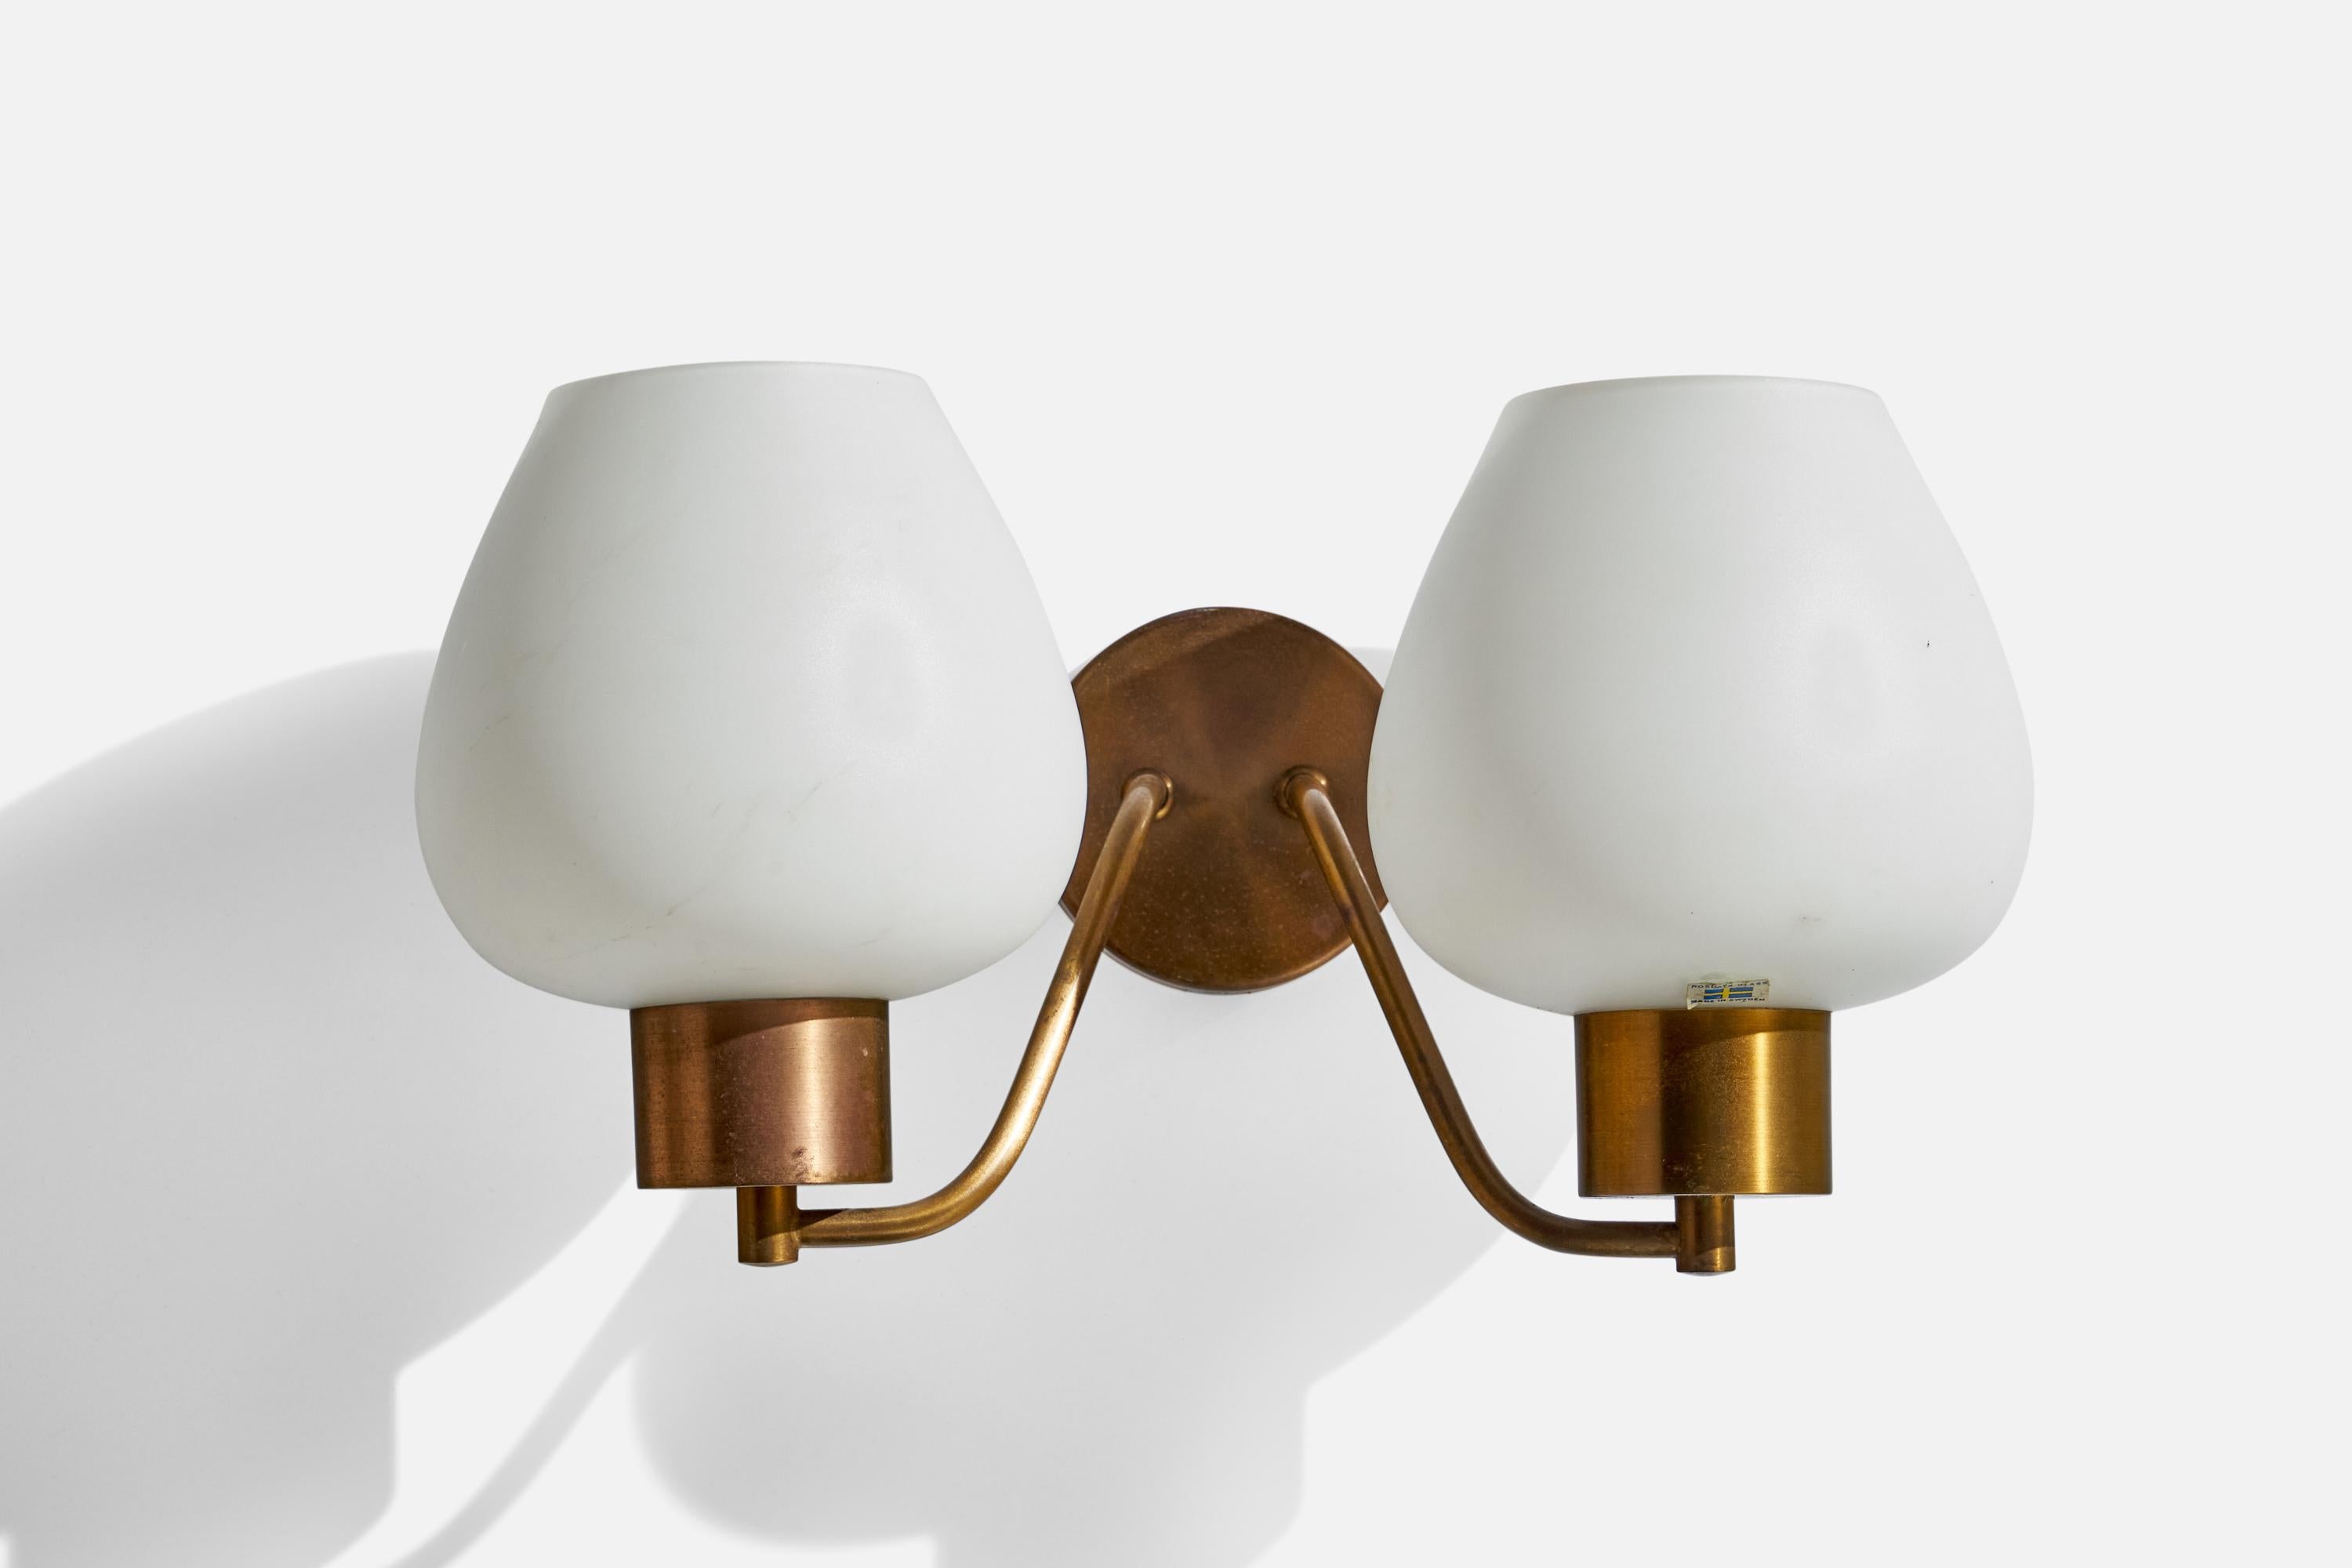 A pair of brass and opaline glass wall lights designed and produced Rosdala Glas, Sweden, c. 1970s.

Overall Dimensions (inches): 9”  H x 7.5” W 16” x 8.5” D
Back Plate Dimensions (inches): 4”  H x 4”  W x .75”  D
Bulb Specifications: E-26